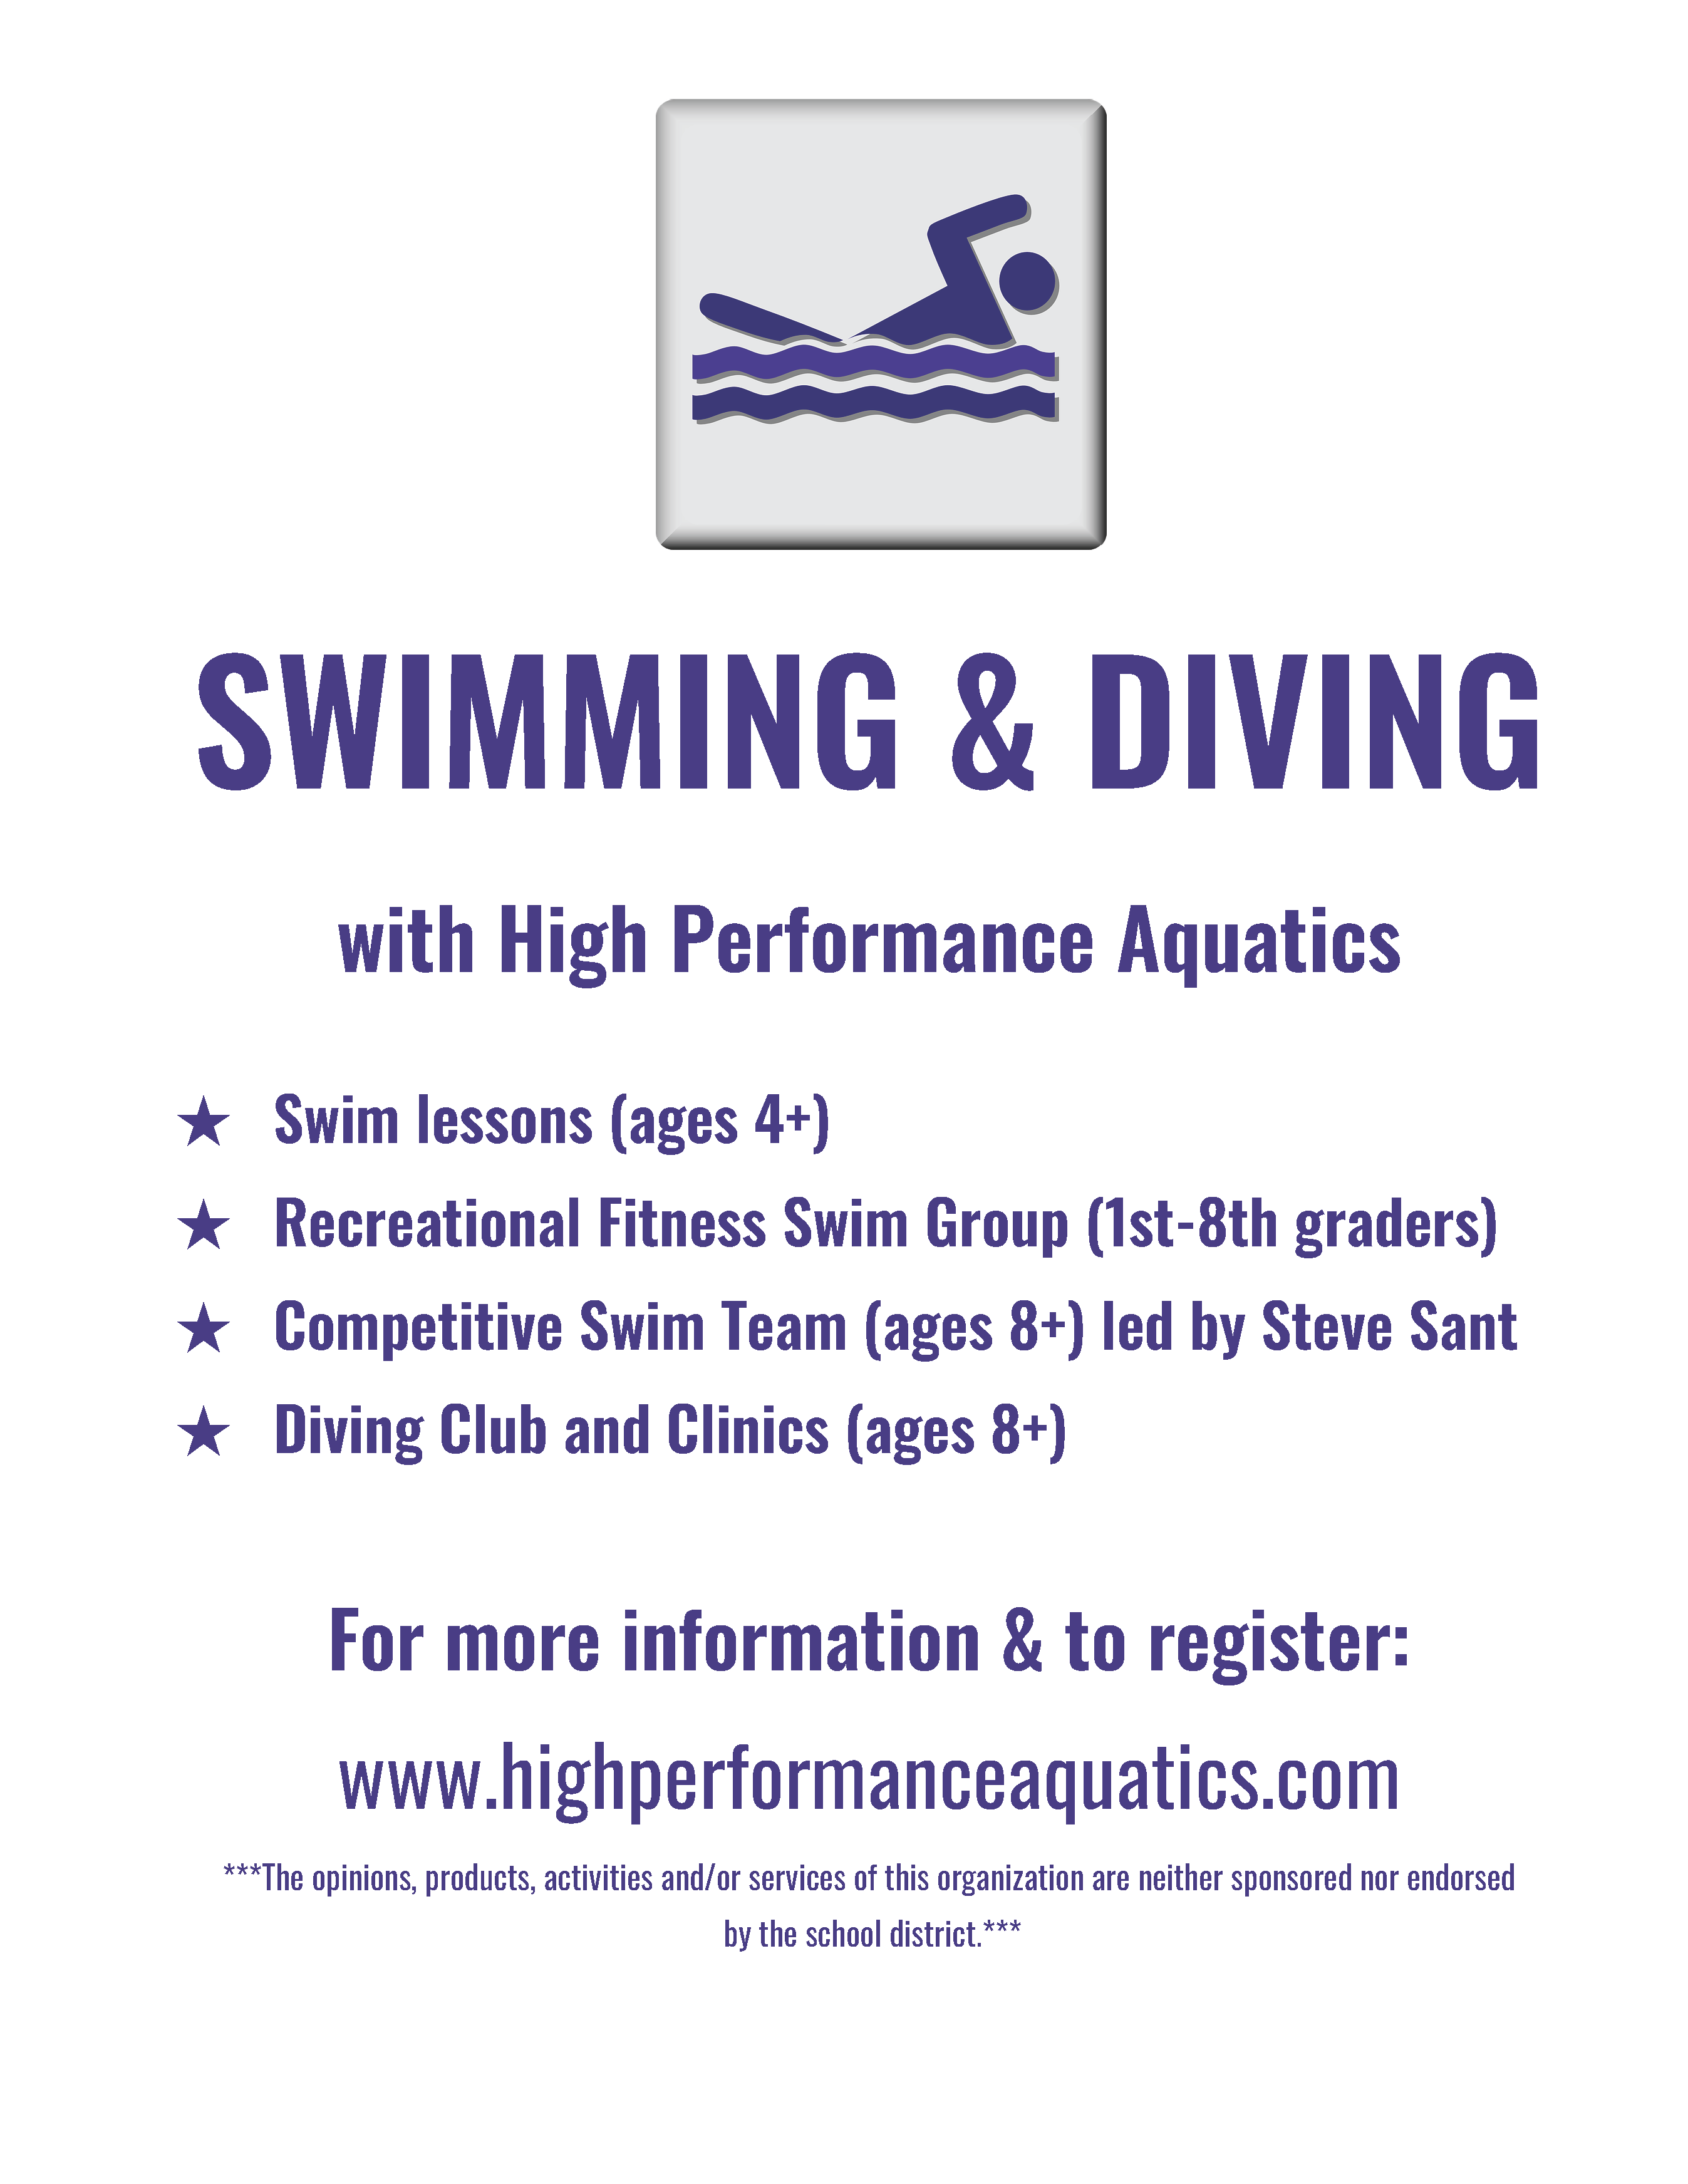 Swimming & Diving flyer link